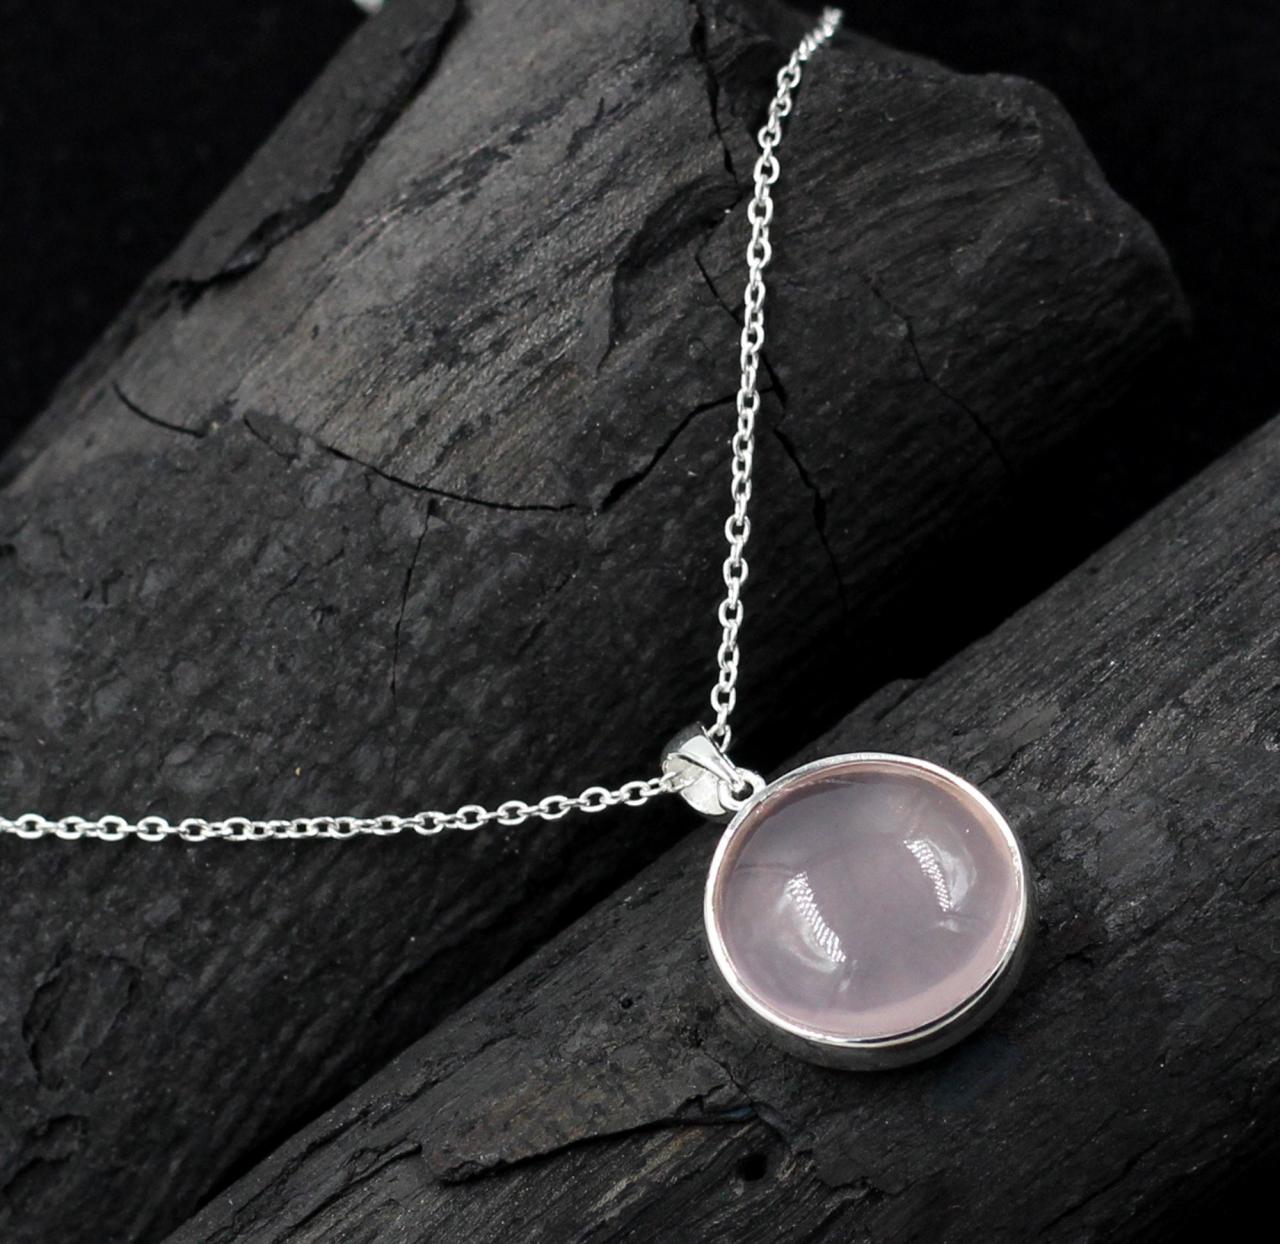 Brazilian Rose Quartz Charming Necklace 925 Sterling Silver Jewelry Minimal Pendant Chain Gift For Daughter,my Birthday Present